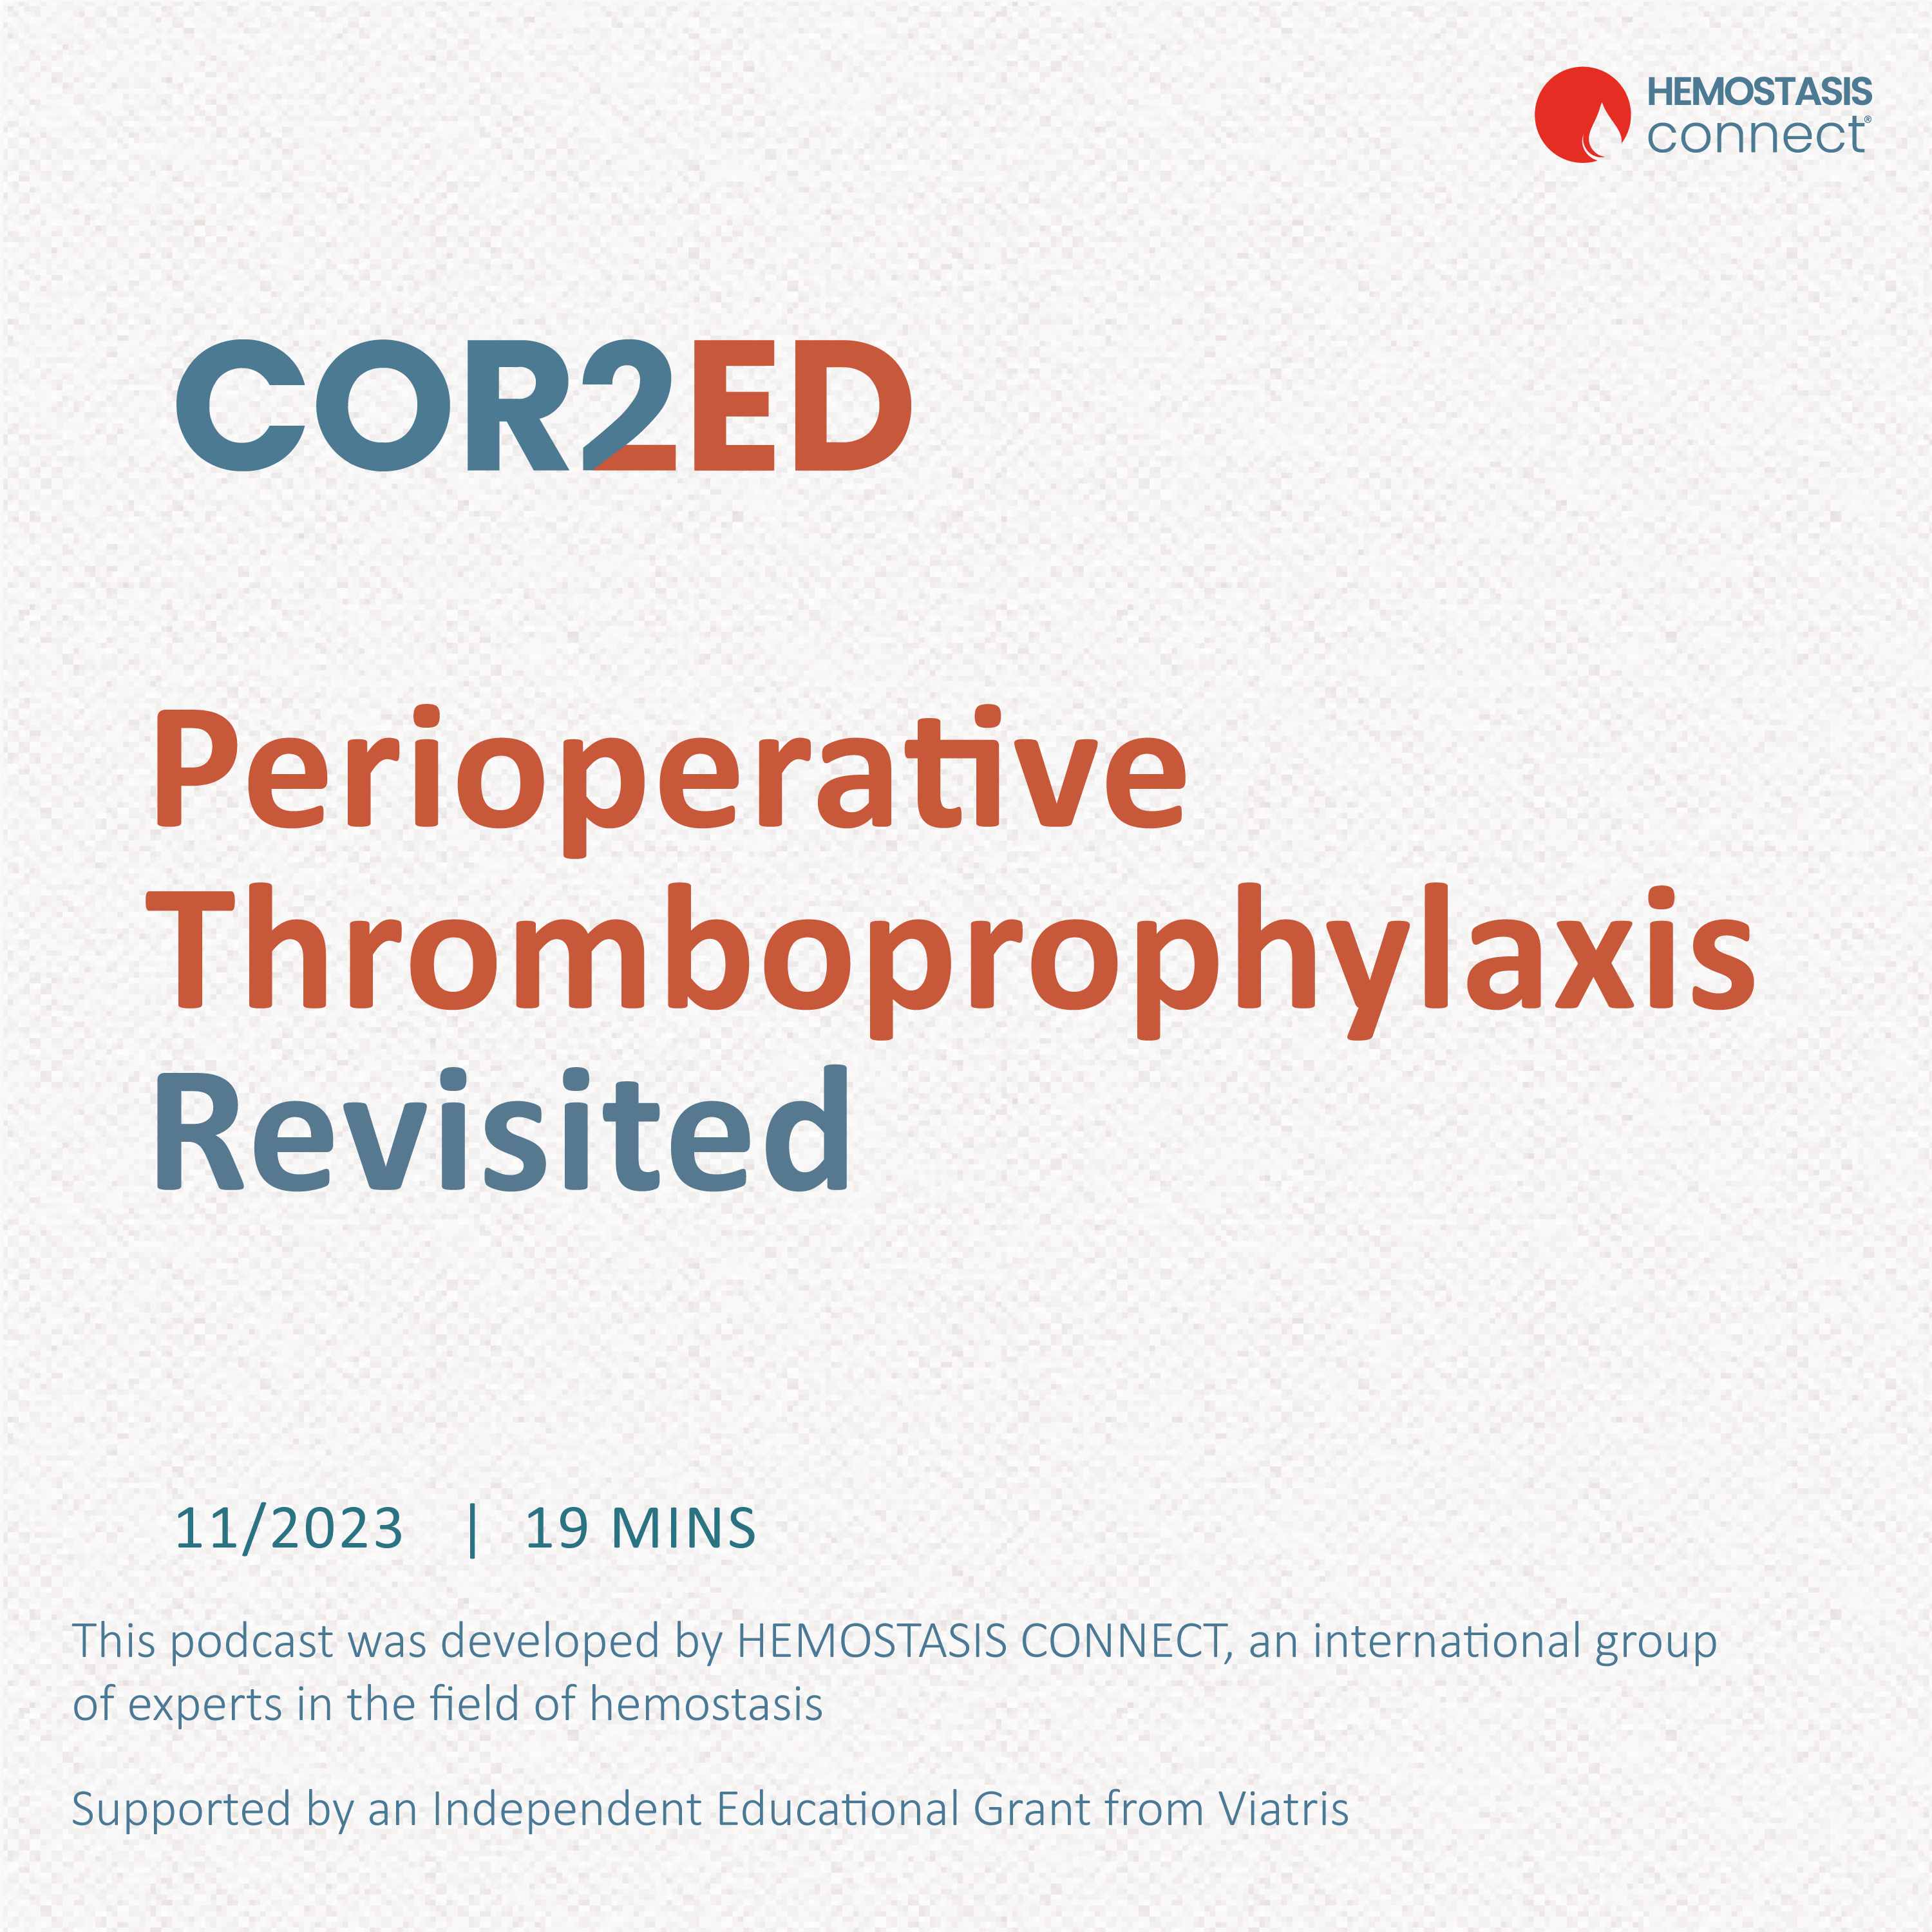 Perioperative Thromboprophylaxis Revisited